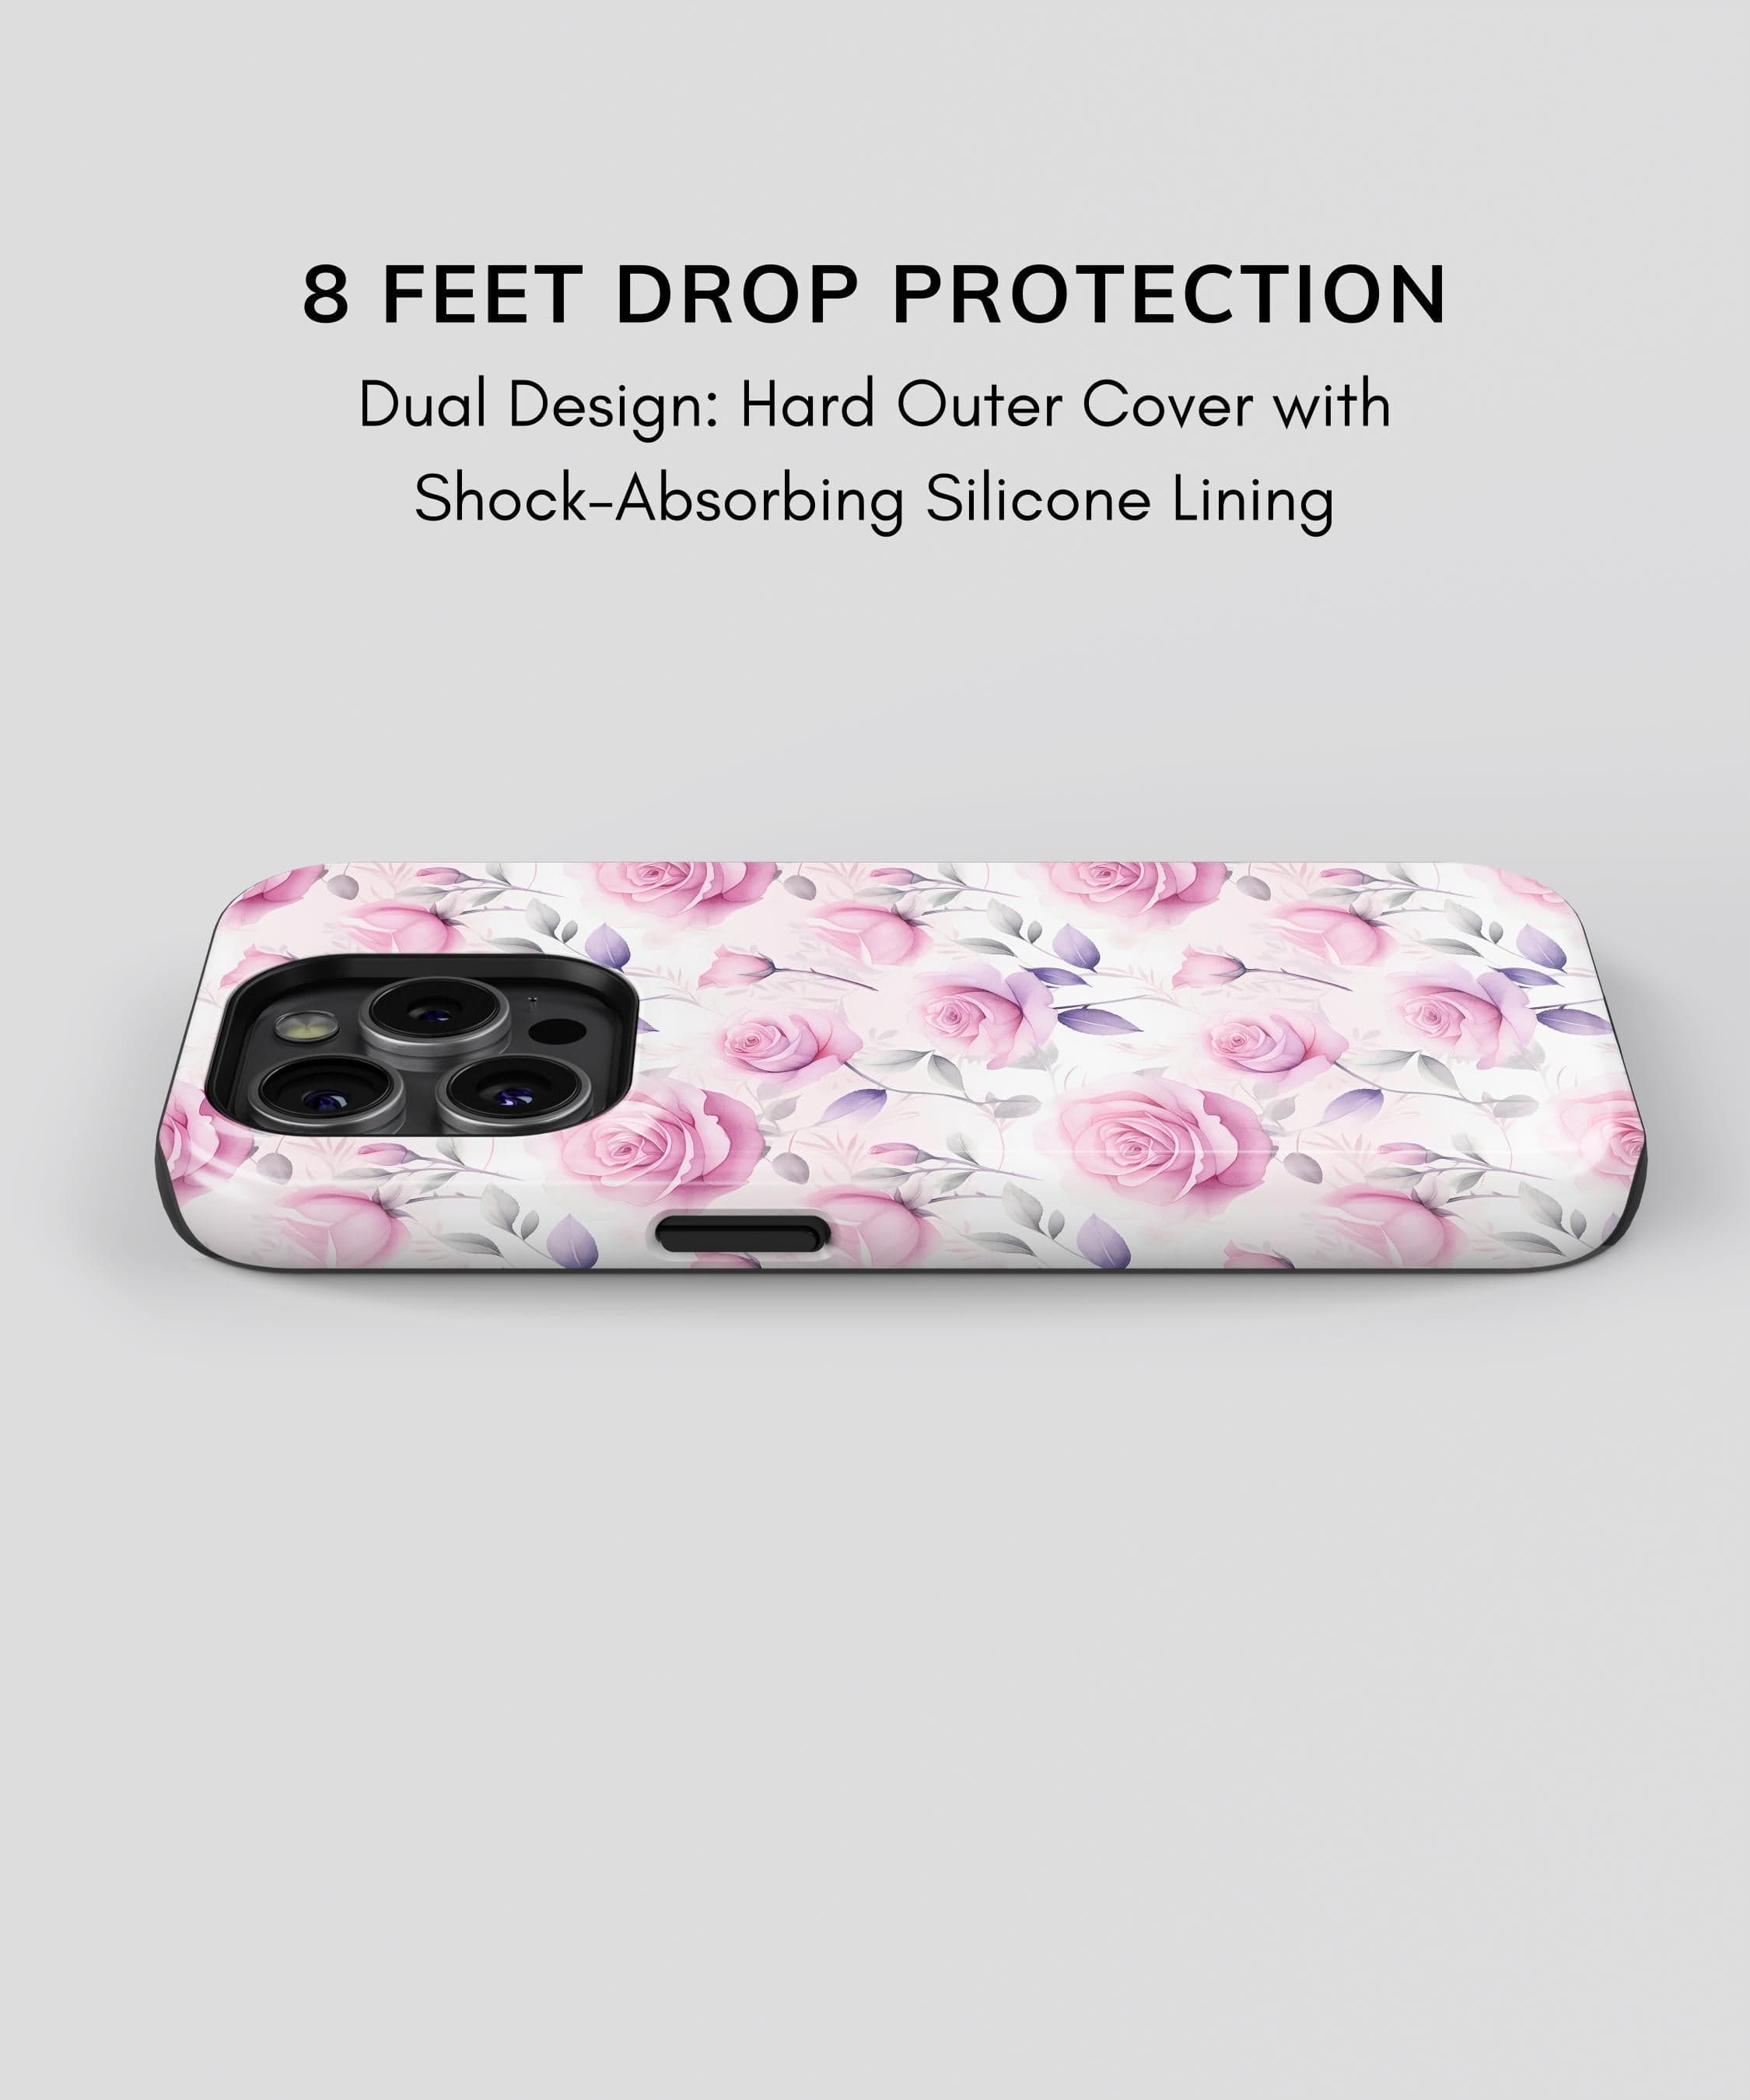 Lovely Rose iPhone Case